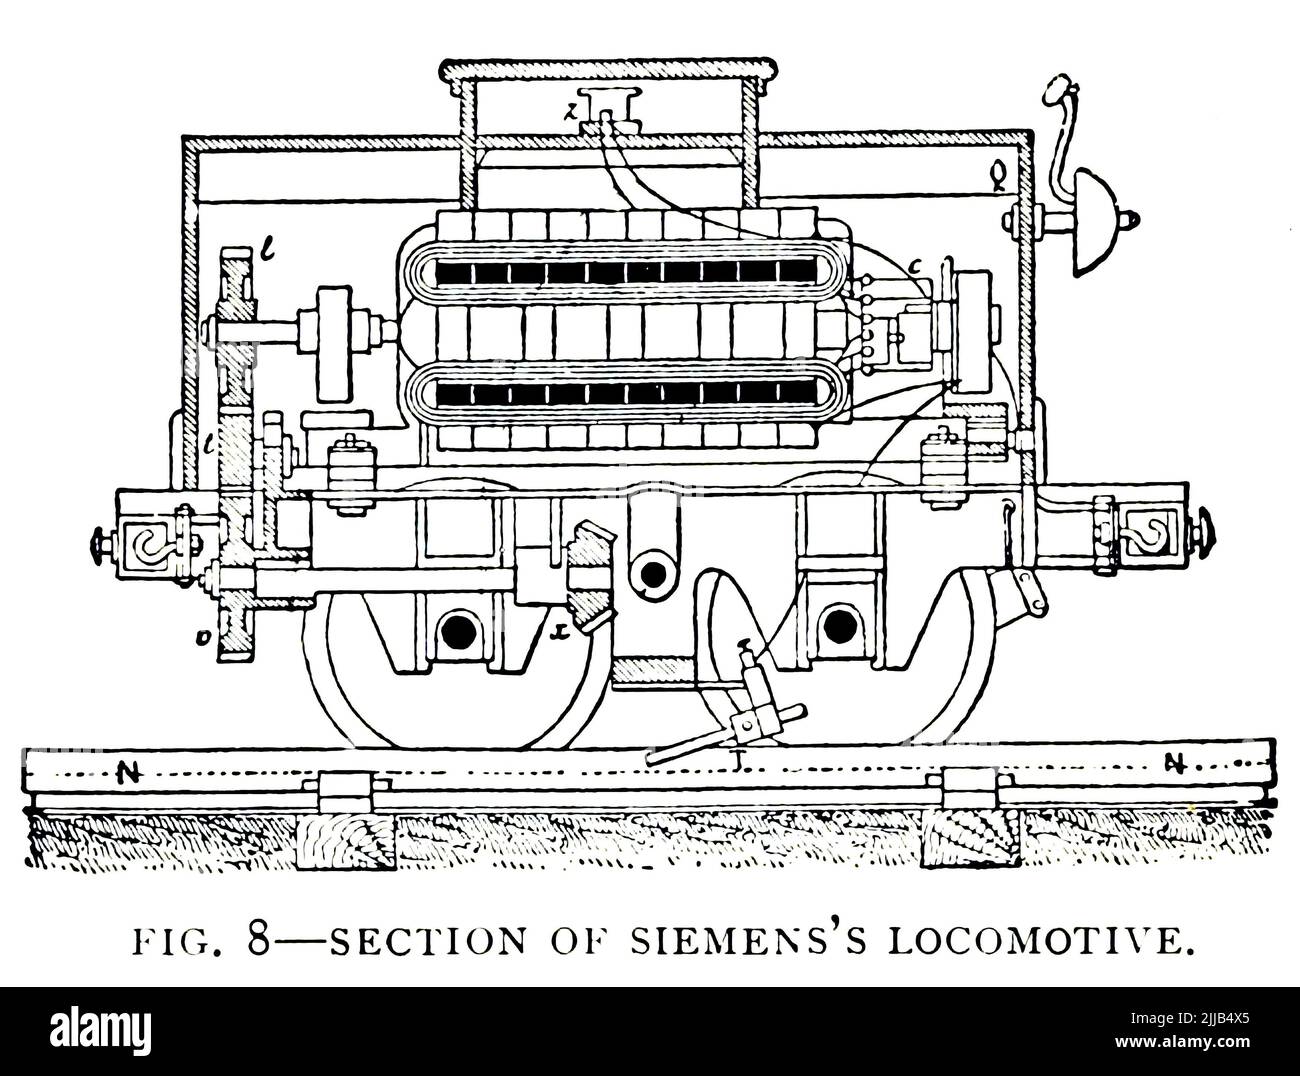 Section of Siemens's Locomotive from the article ' DEVELOPMENT OF THE ELECTRIC LOCOMOTIVE ' By B. J. Arnold, M. Am. Inst. E. E. from The Engineering Magazine DEVOTED TO INDUSTRIAL PROGRESS Volume VII April to September, 1894 NEW YORK The Engineering Magazine Co Stock Photo